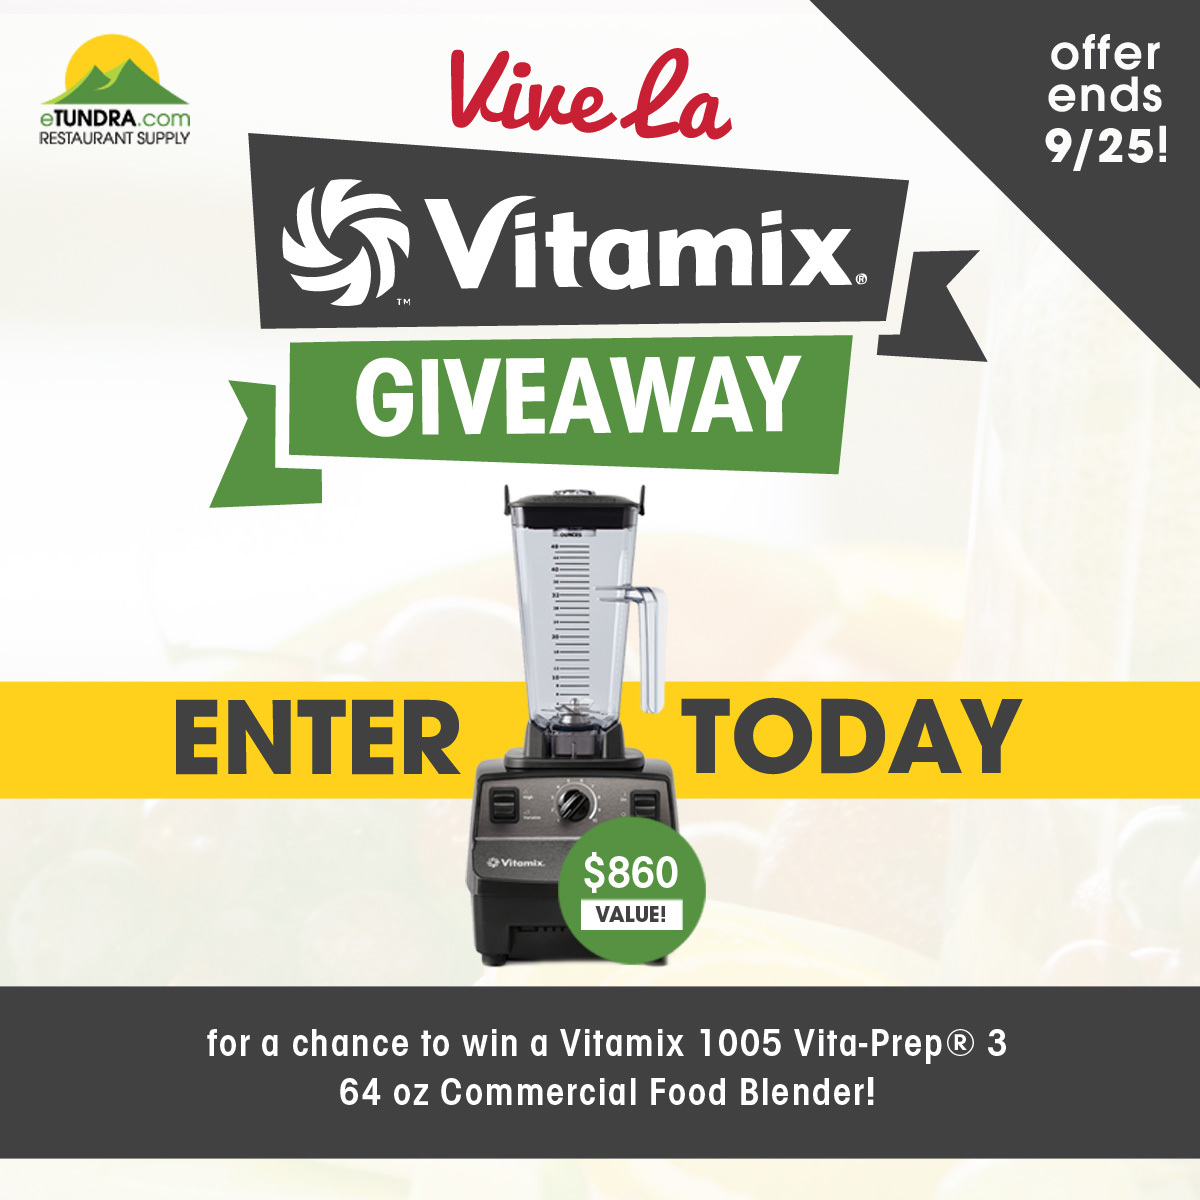 Enter to win a free vitamix!